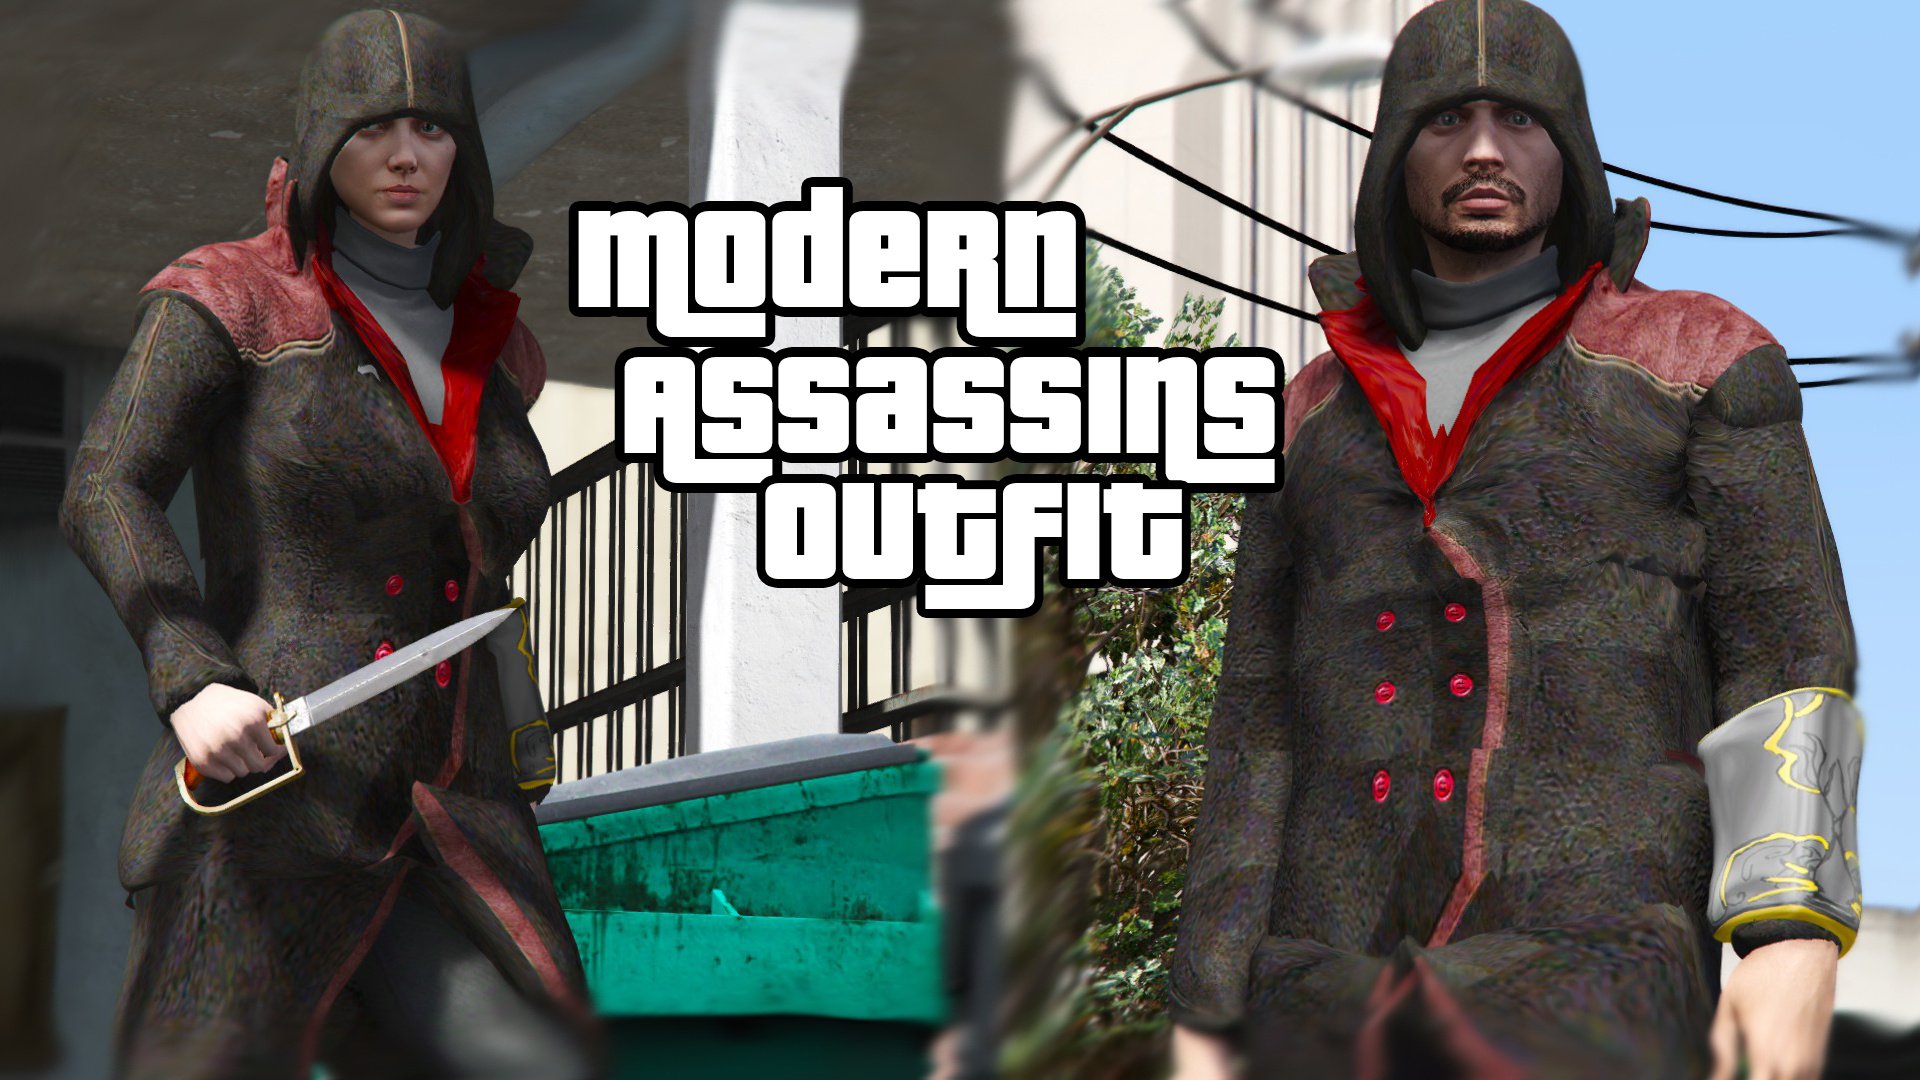 future liver Lyricist Modern Assassin Outfit (Old-Fashioned look) - GTA5-Mods.com